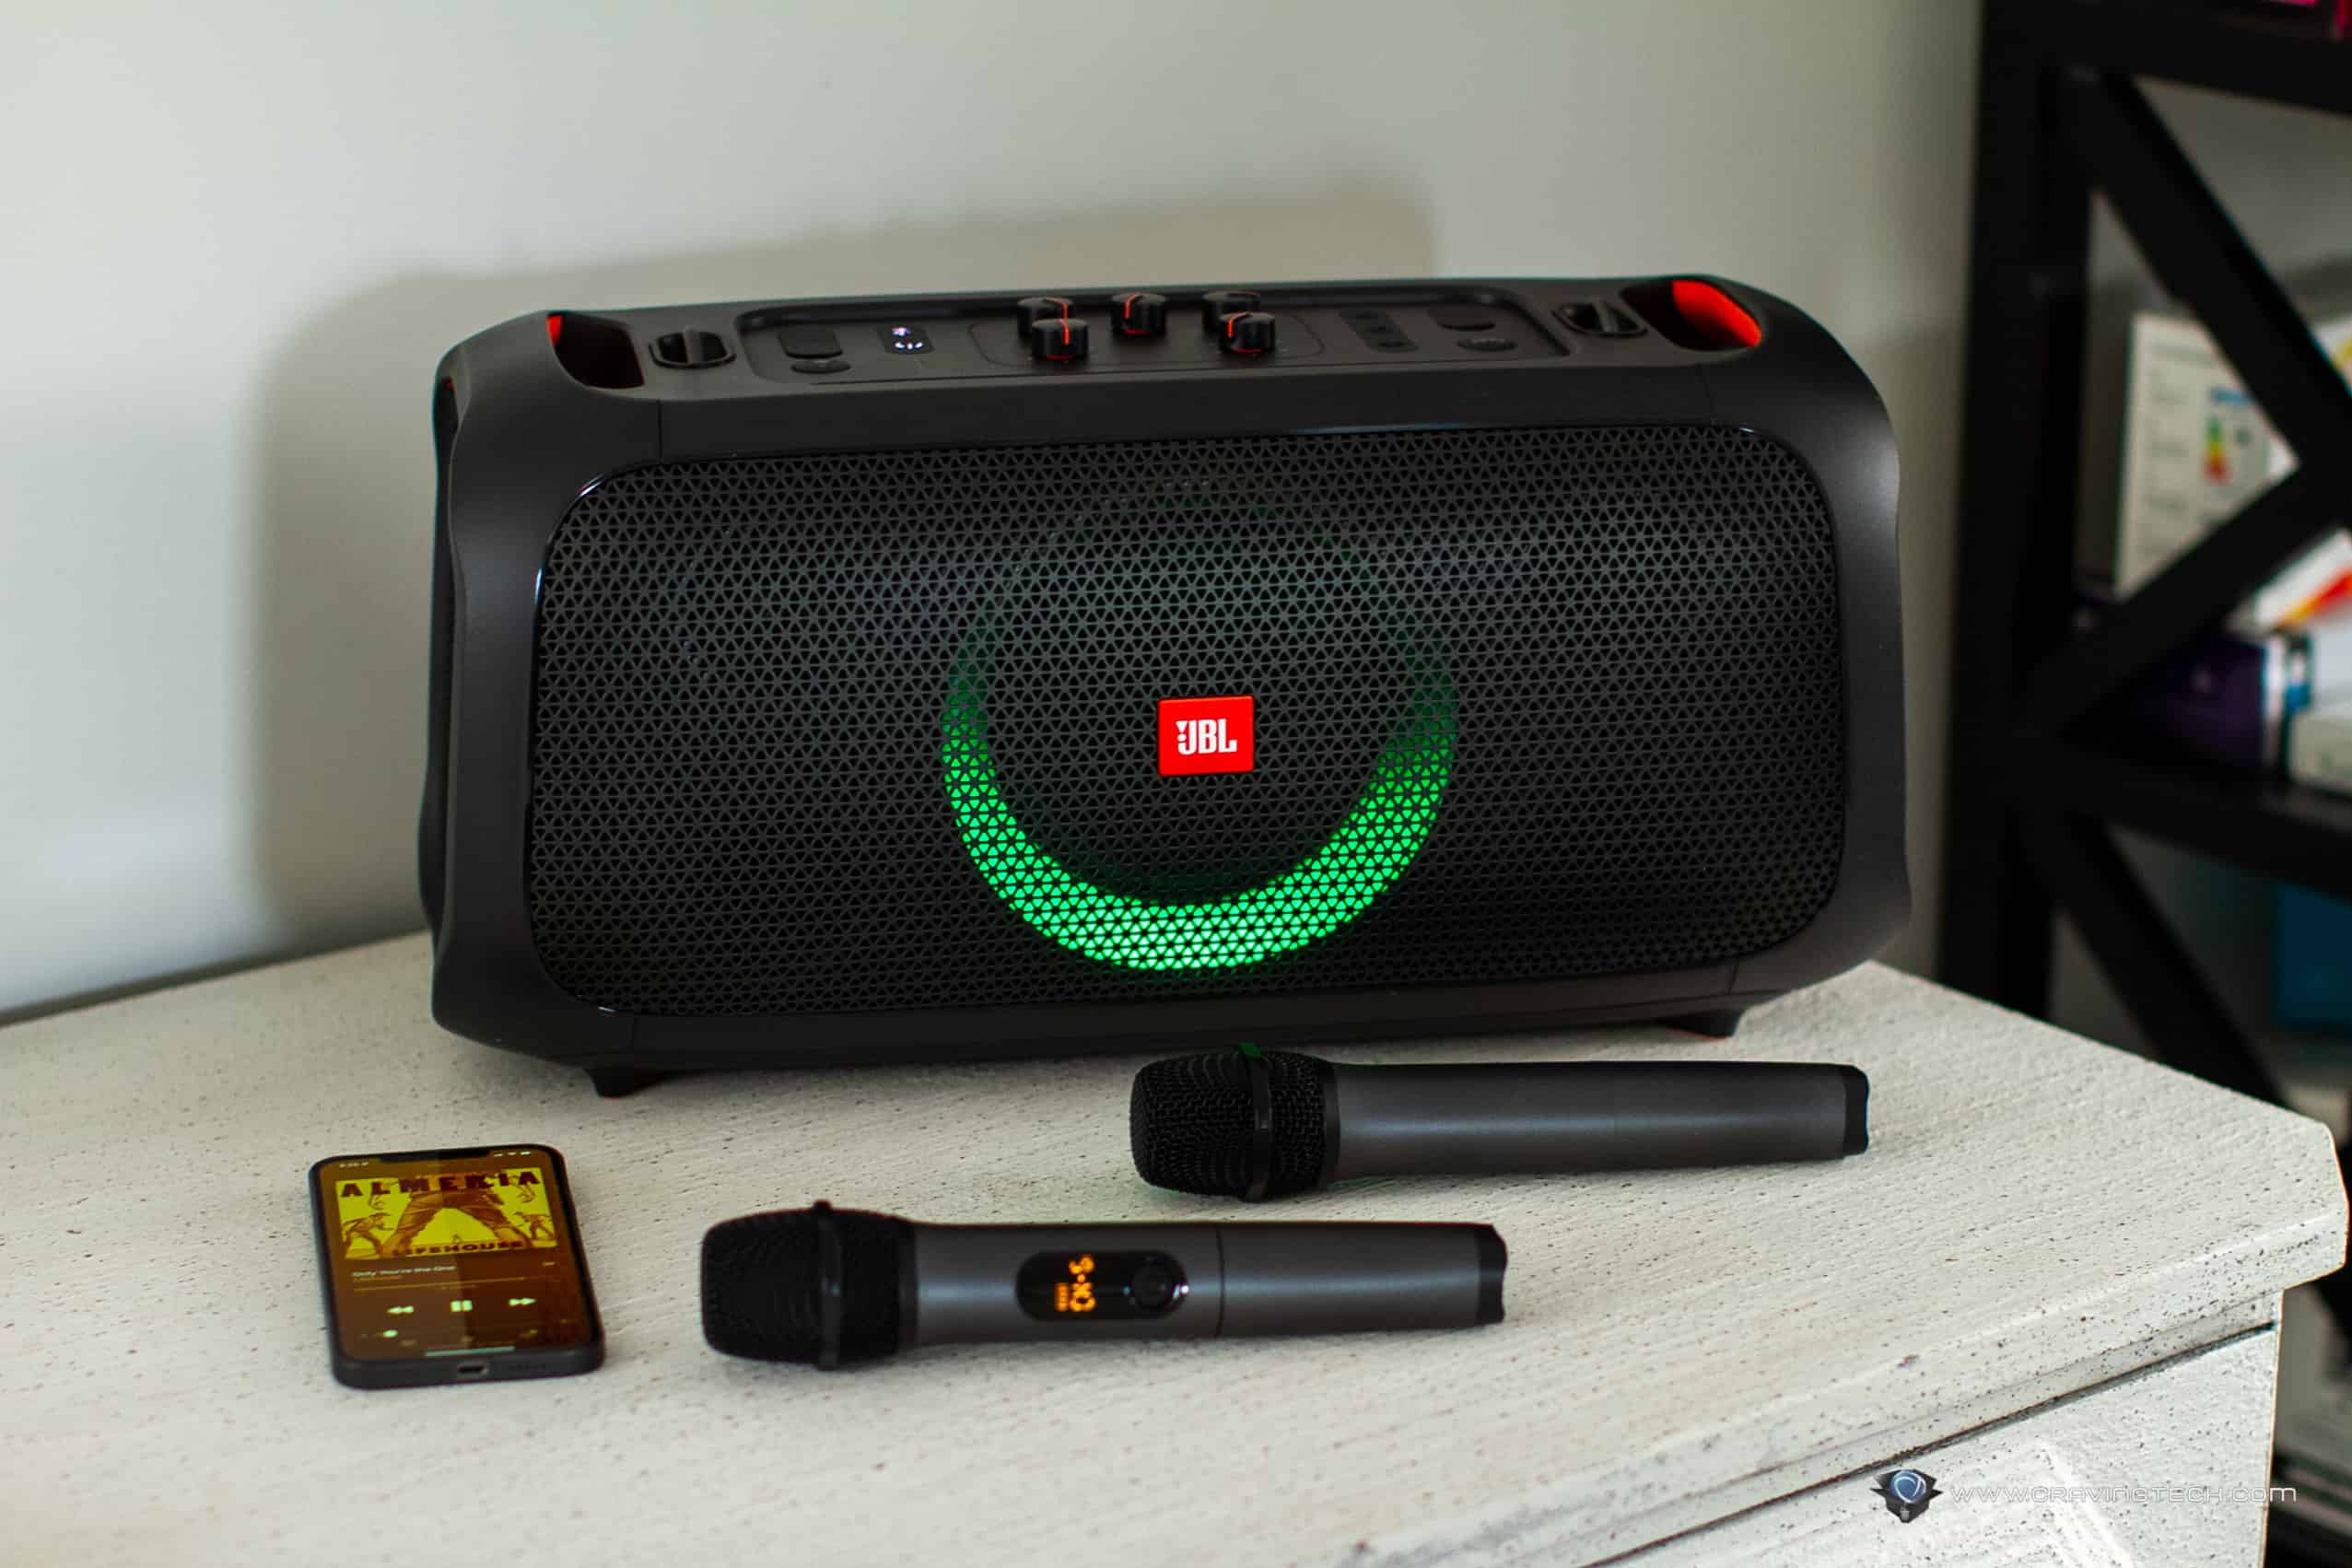 JBL PartyBox On-The-Go Review - More than just a big, portable speaker